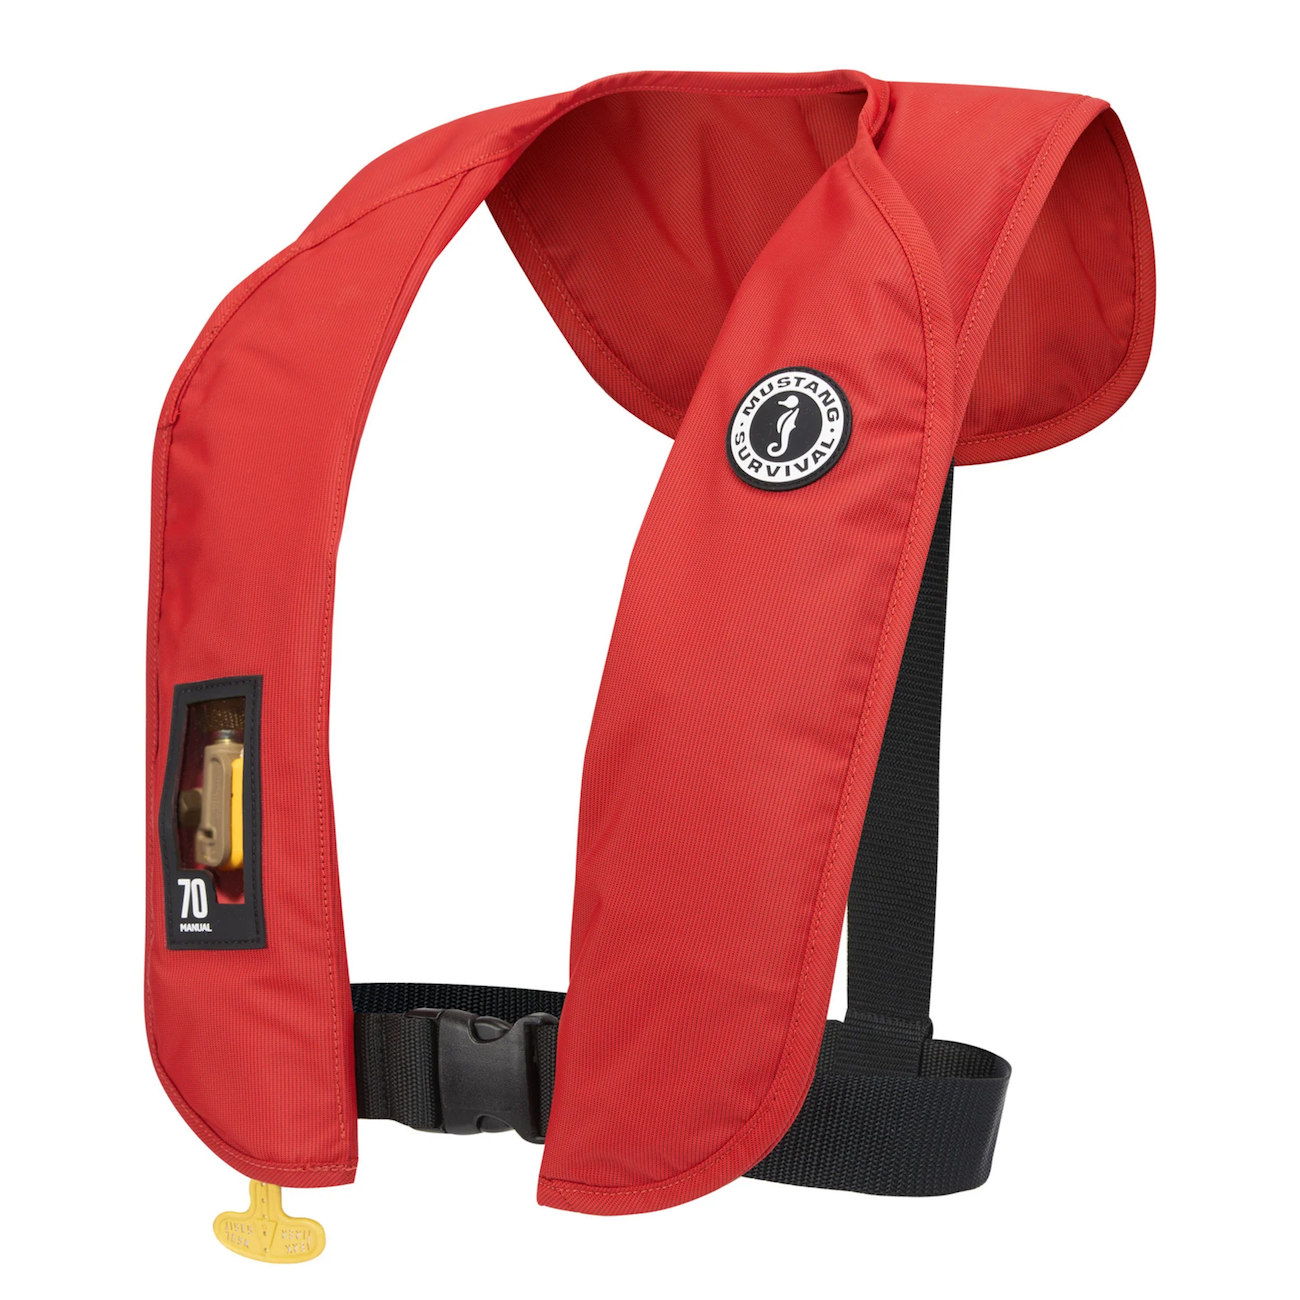 Inflatable Life Jacket (PFD) Owner's Manual